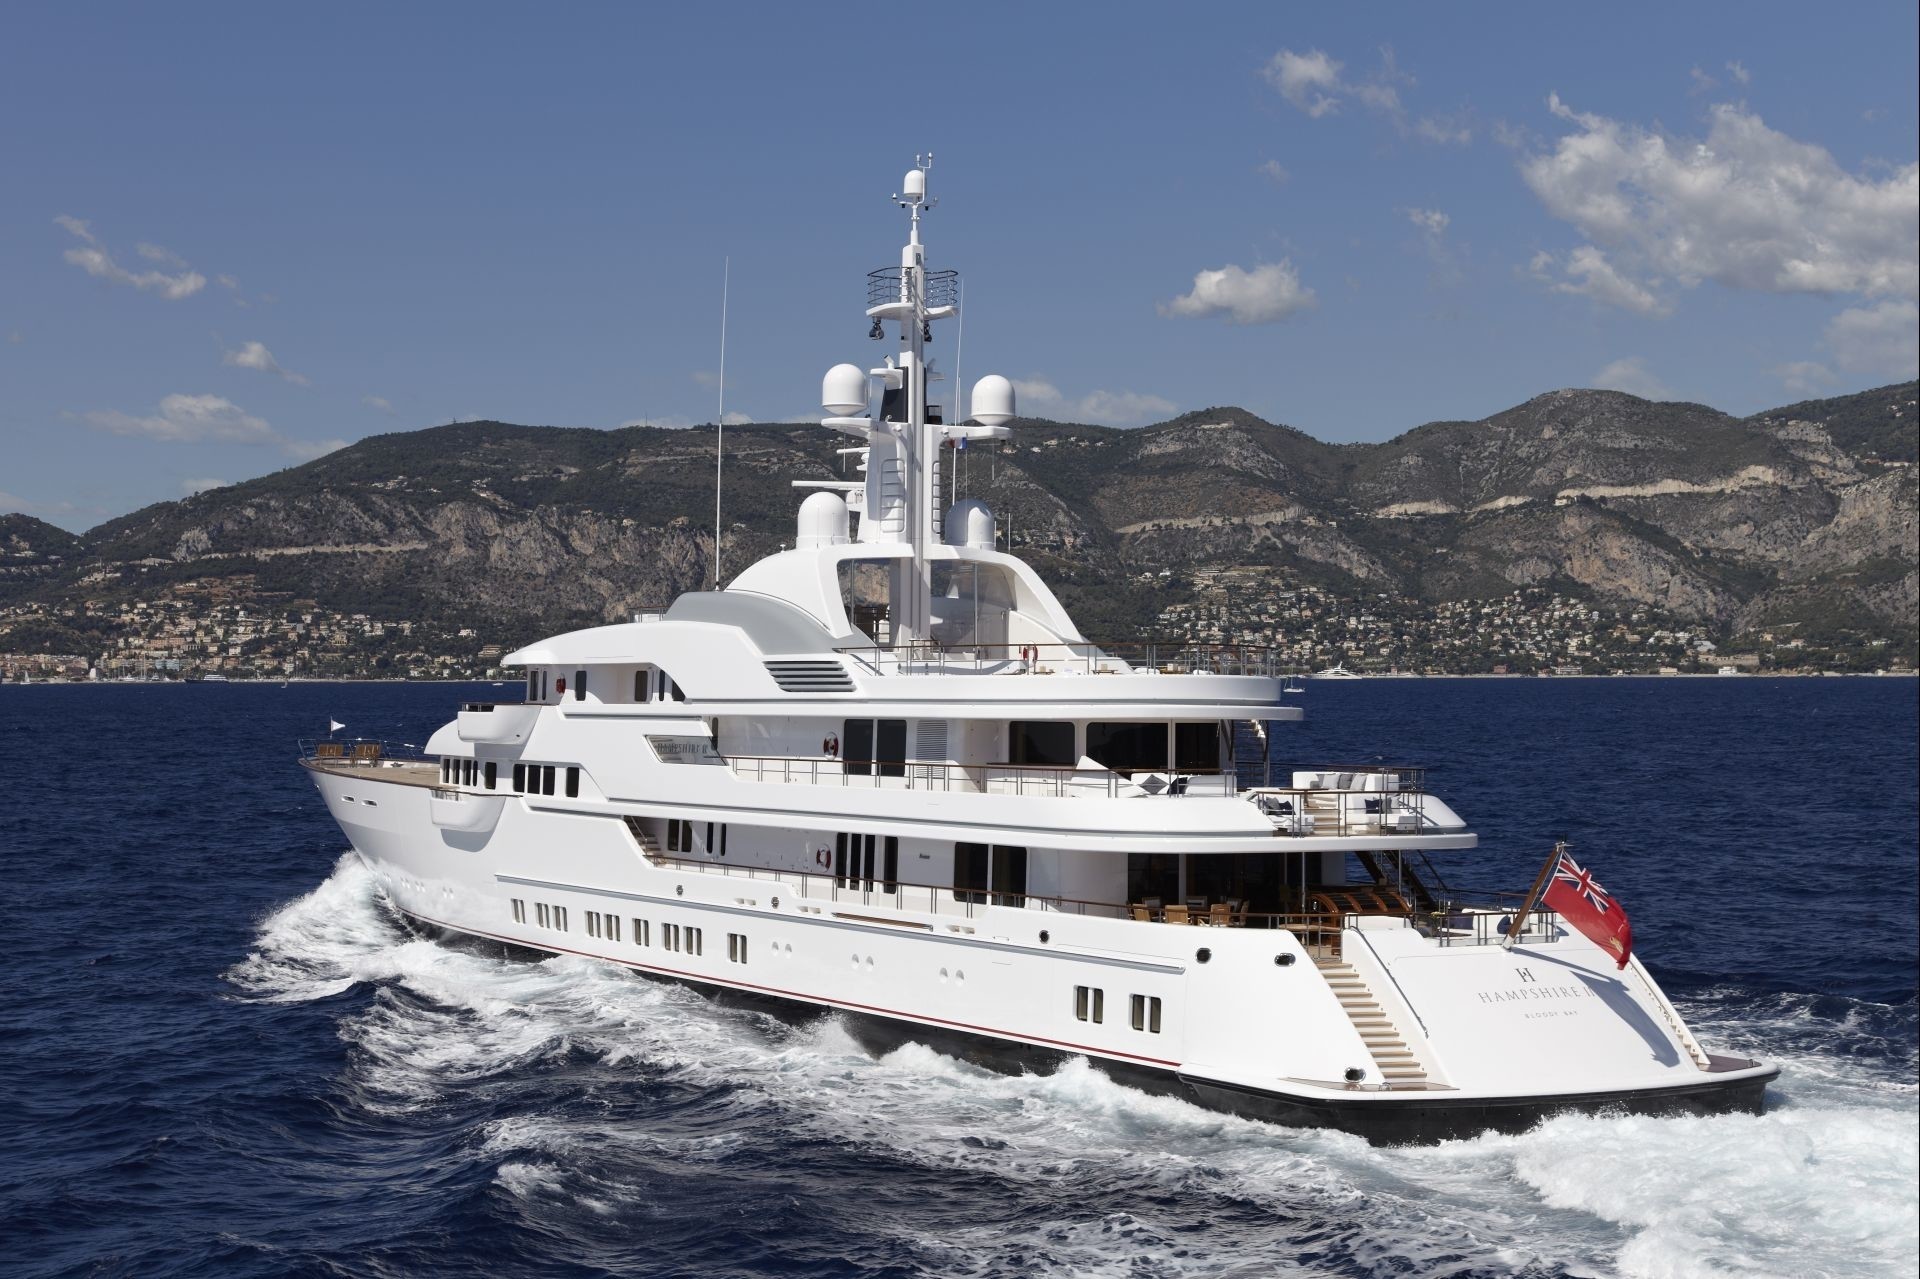 who owns hampshire 2 yacht